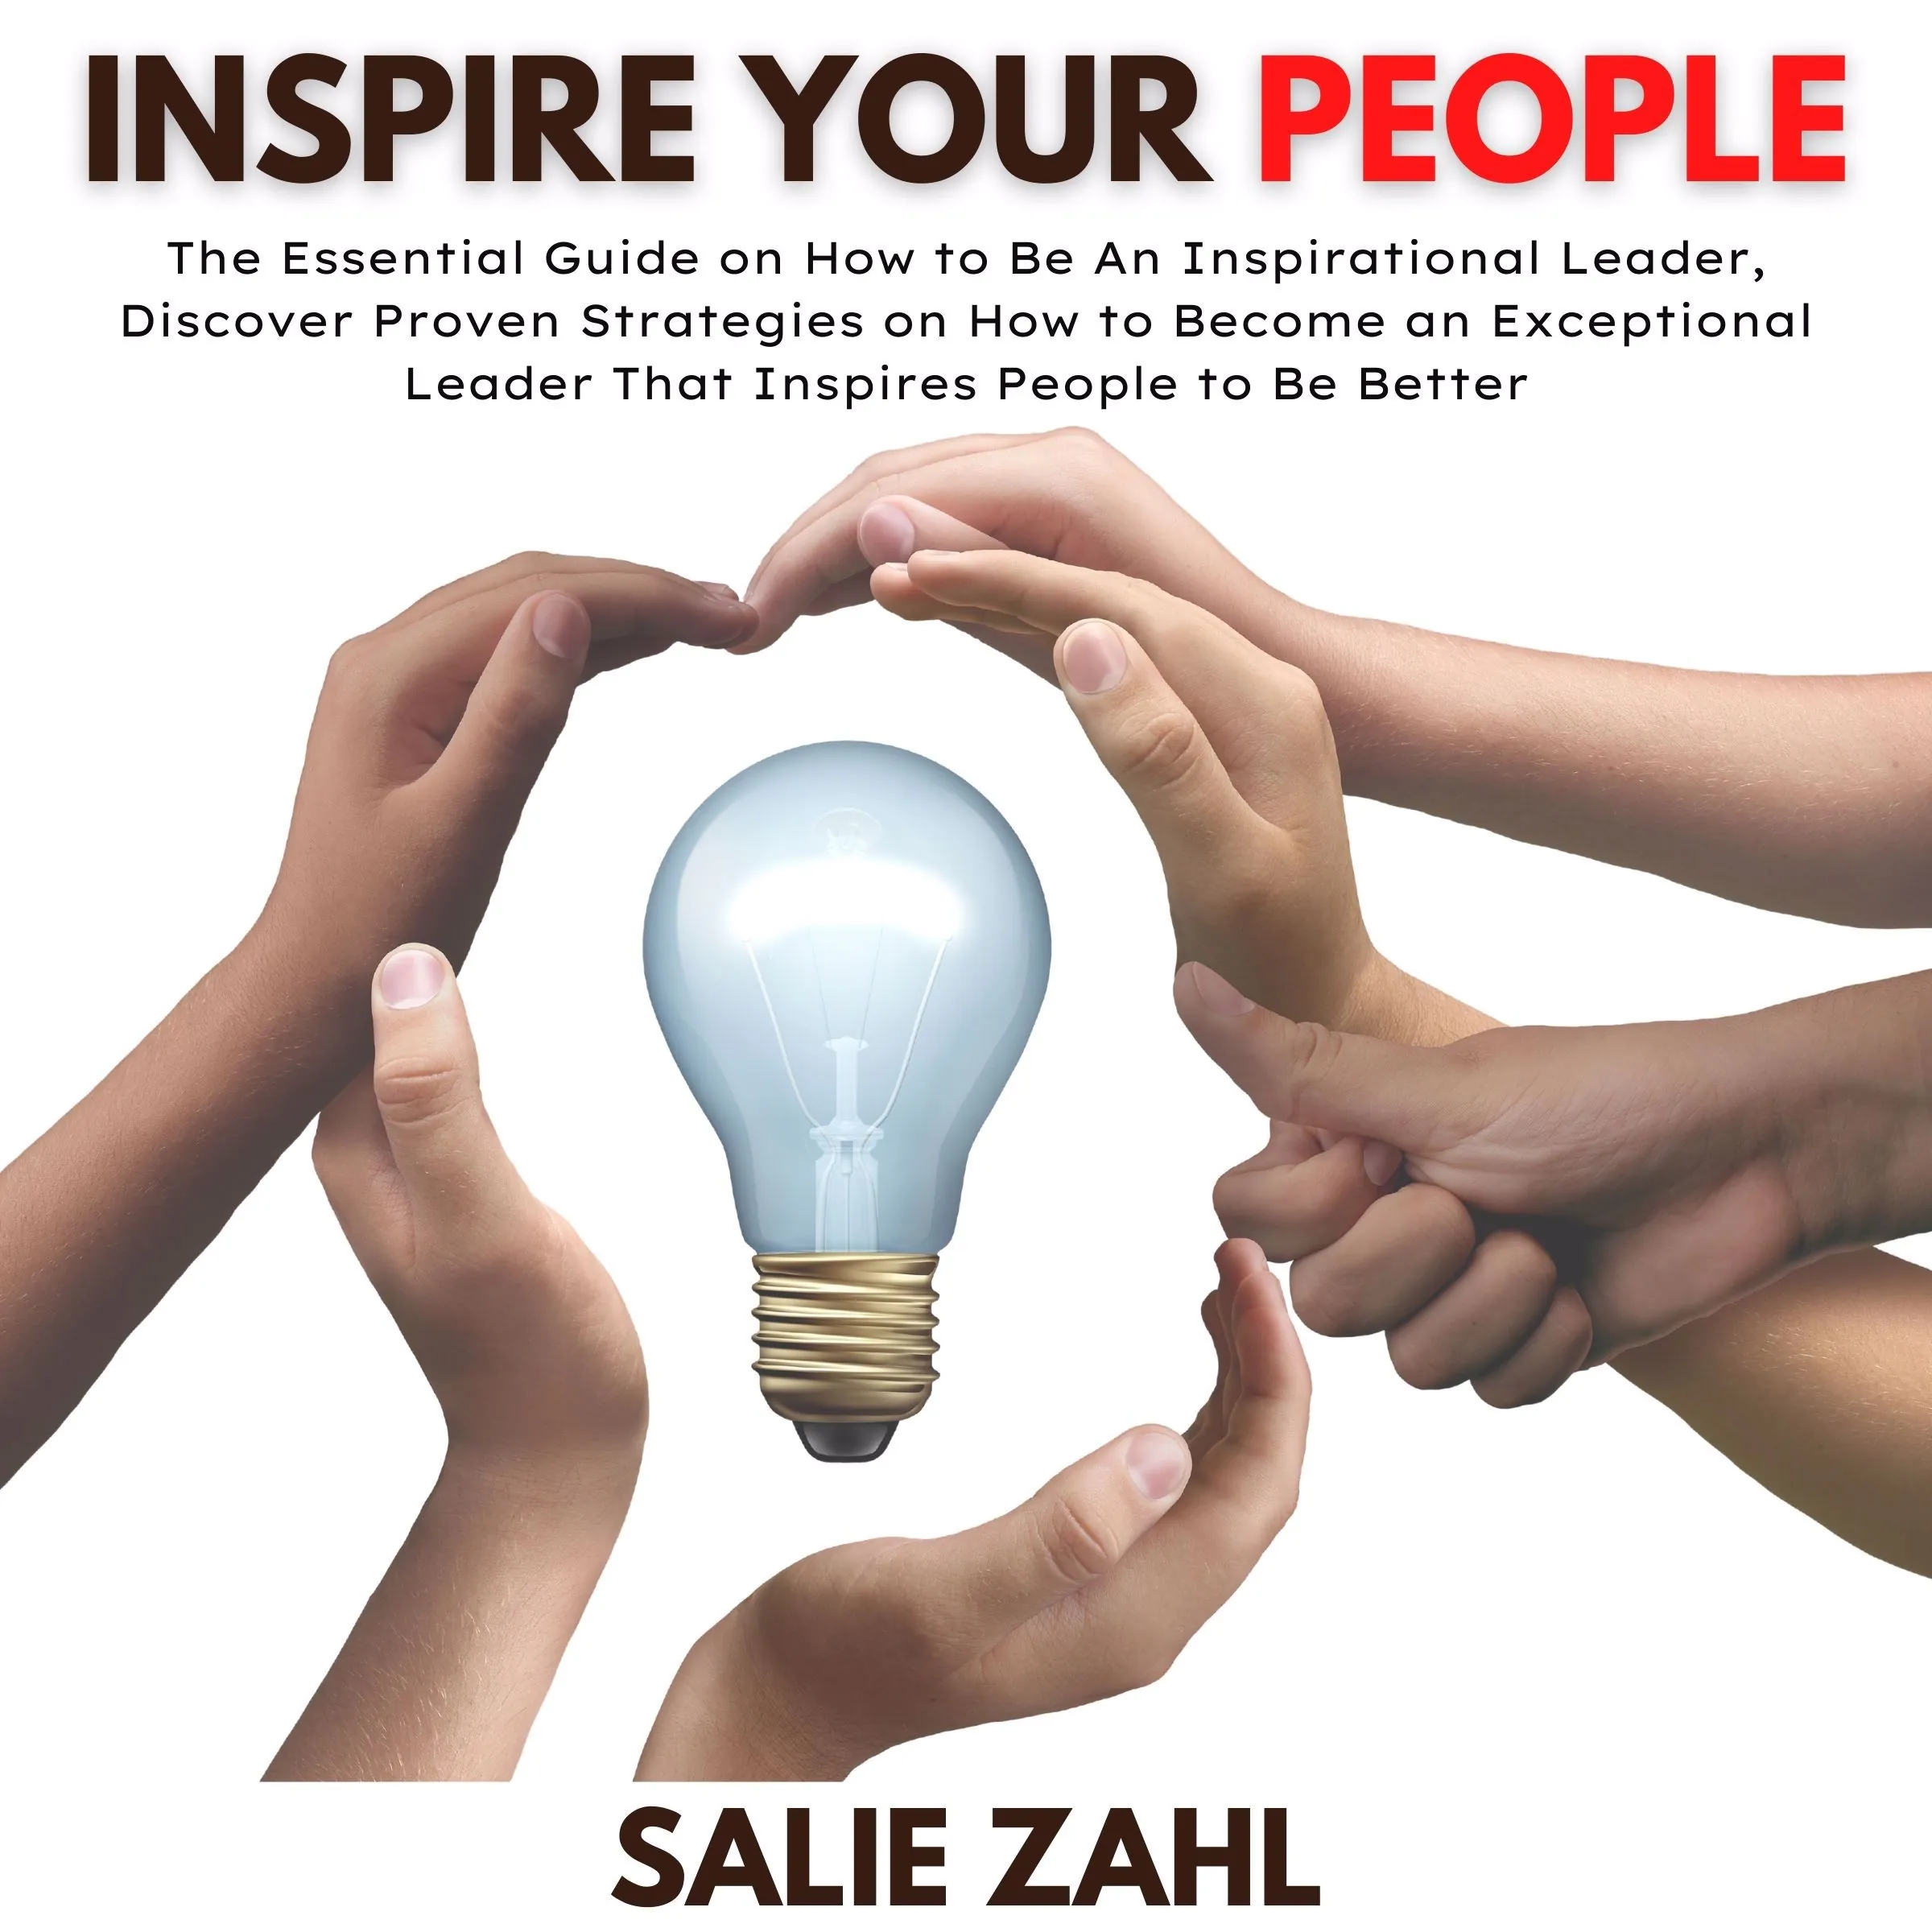 Inspire Your People Audiobook by Salie Zahl